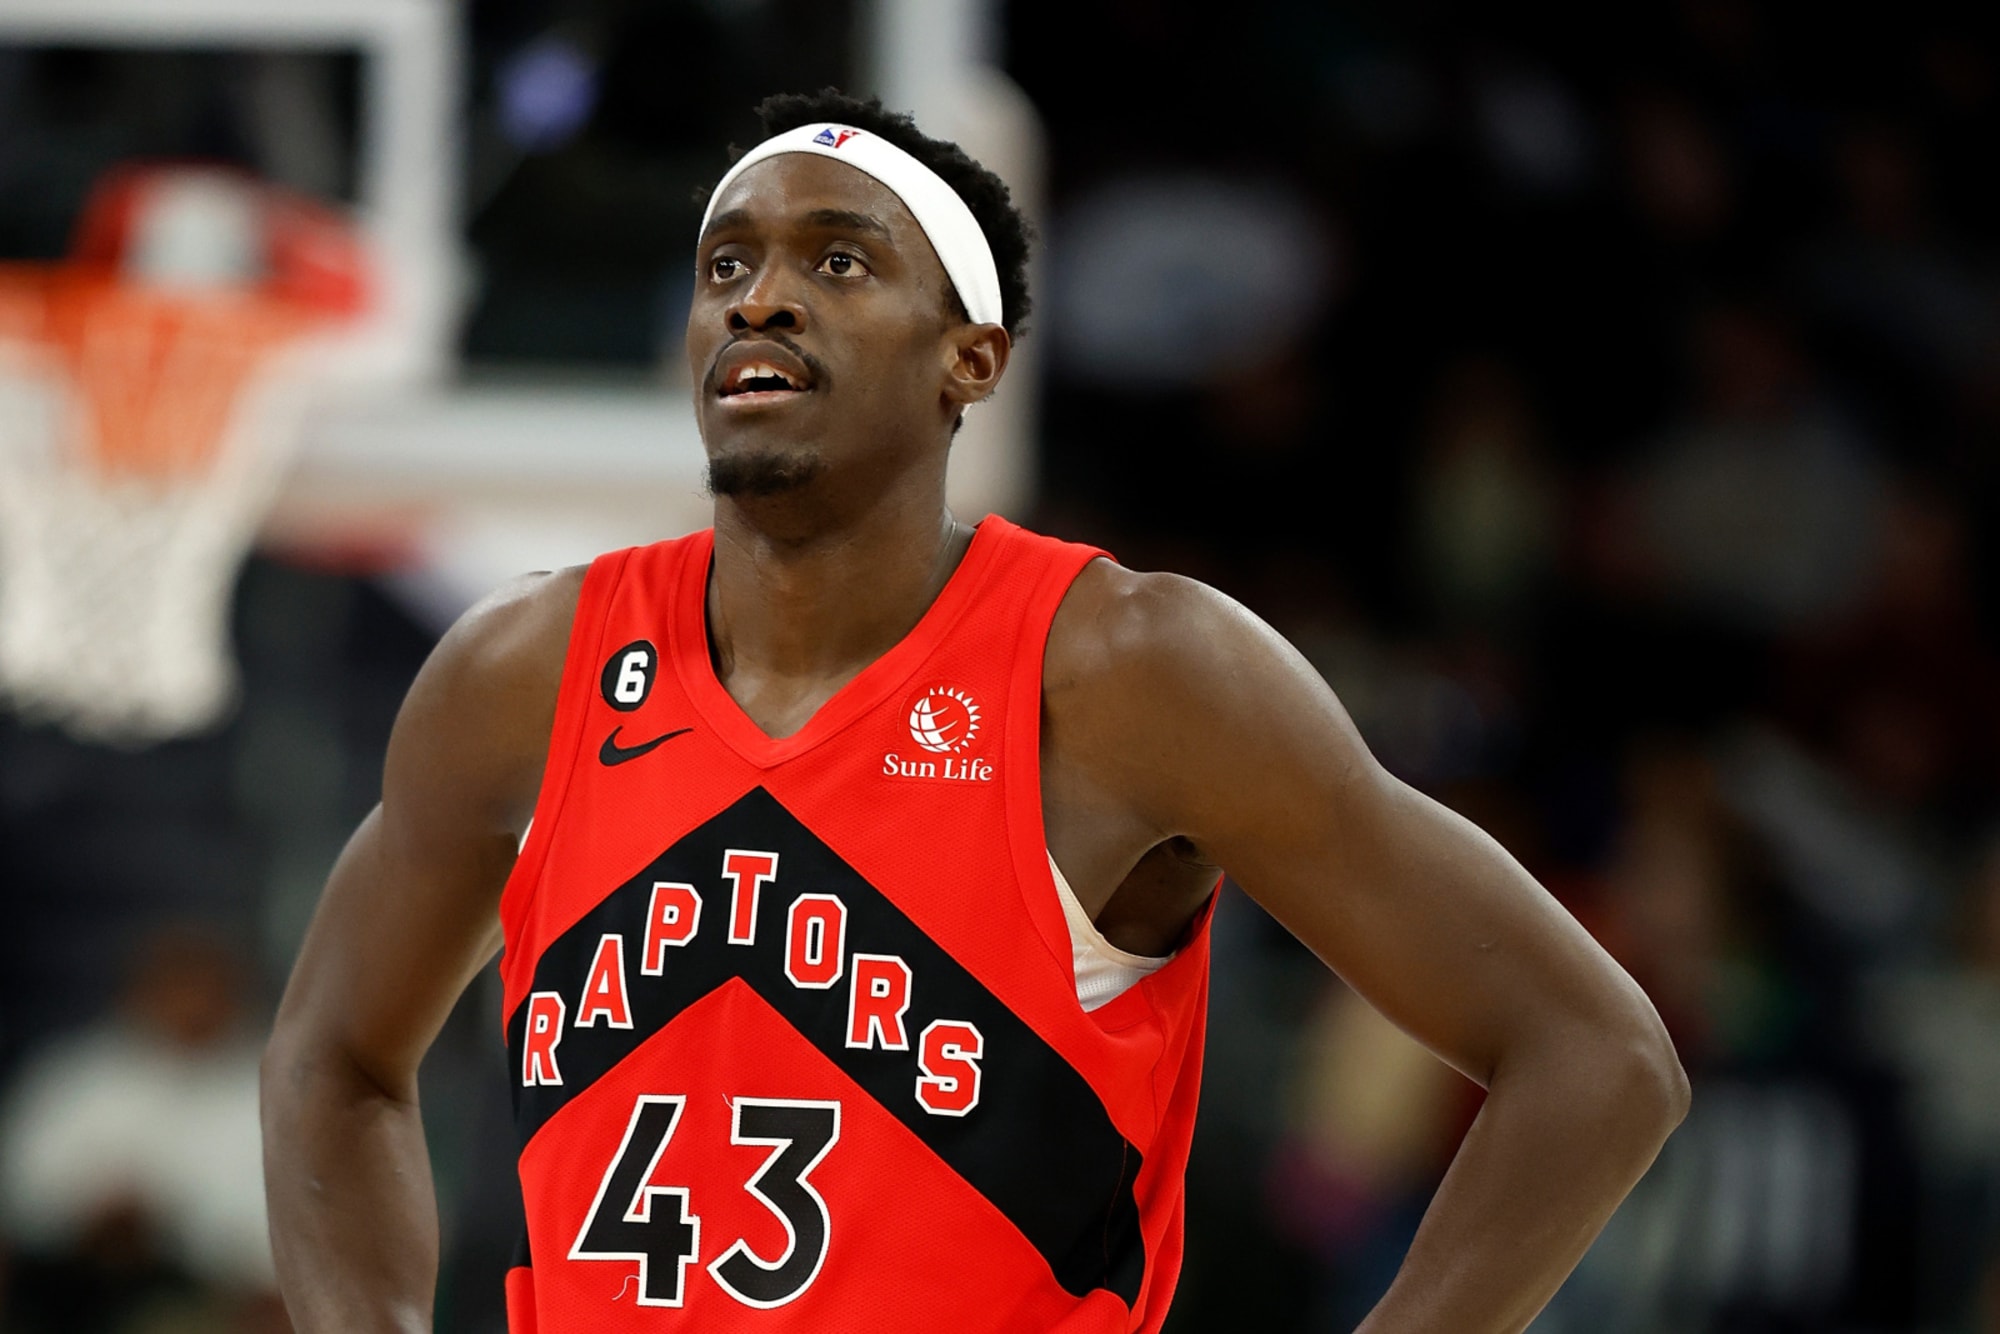 Pascal Siakam and Gradey Dick showing impressive chemistry in Raptors’ summer runs